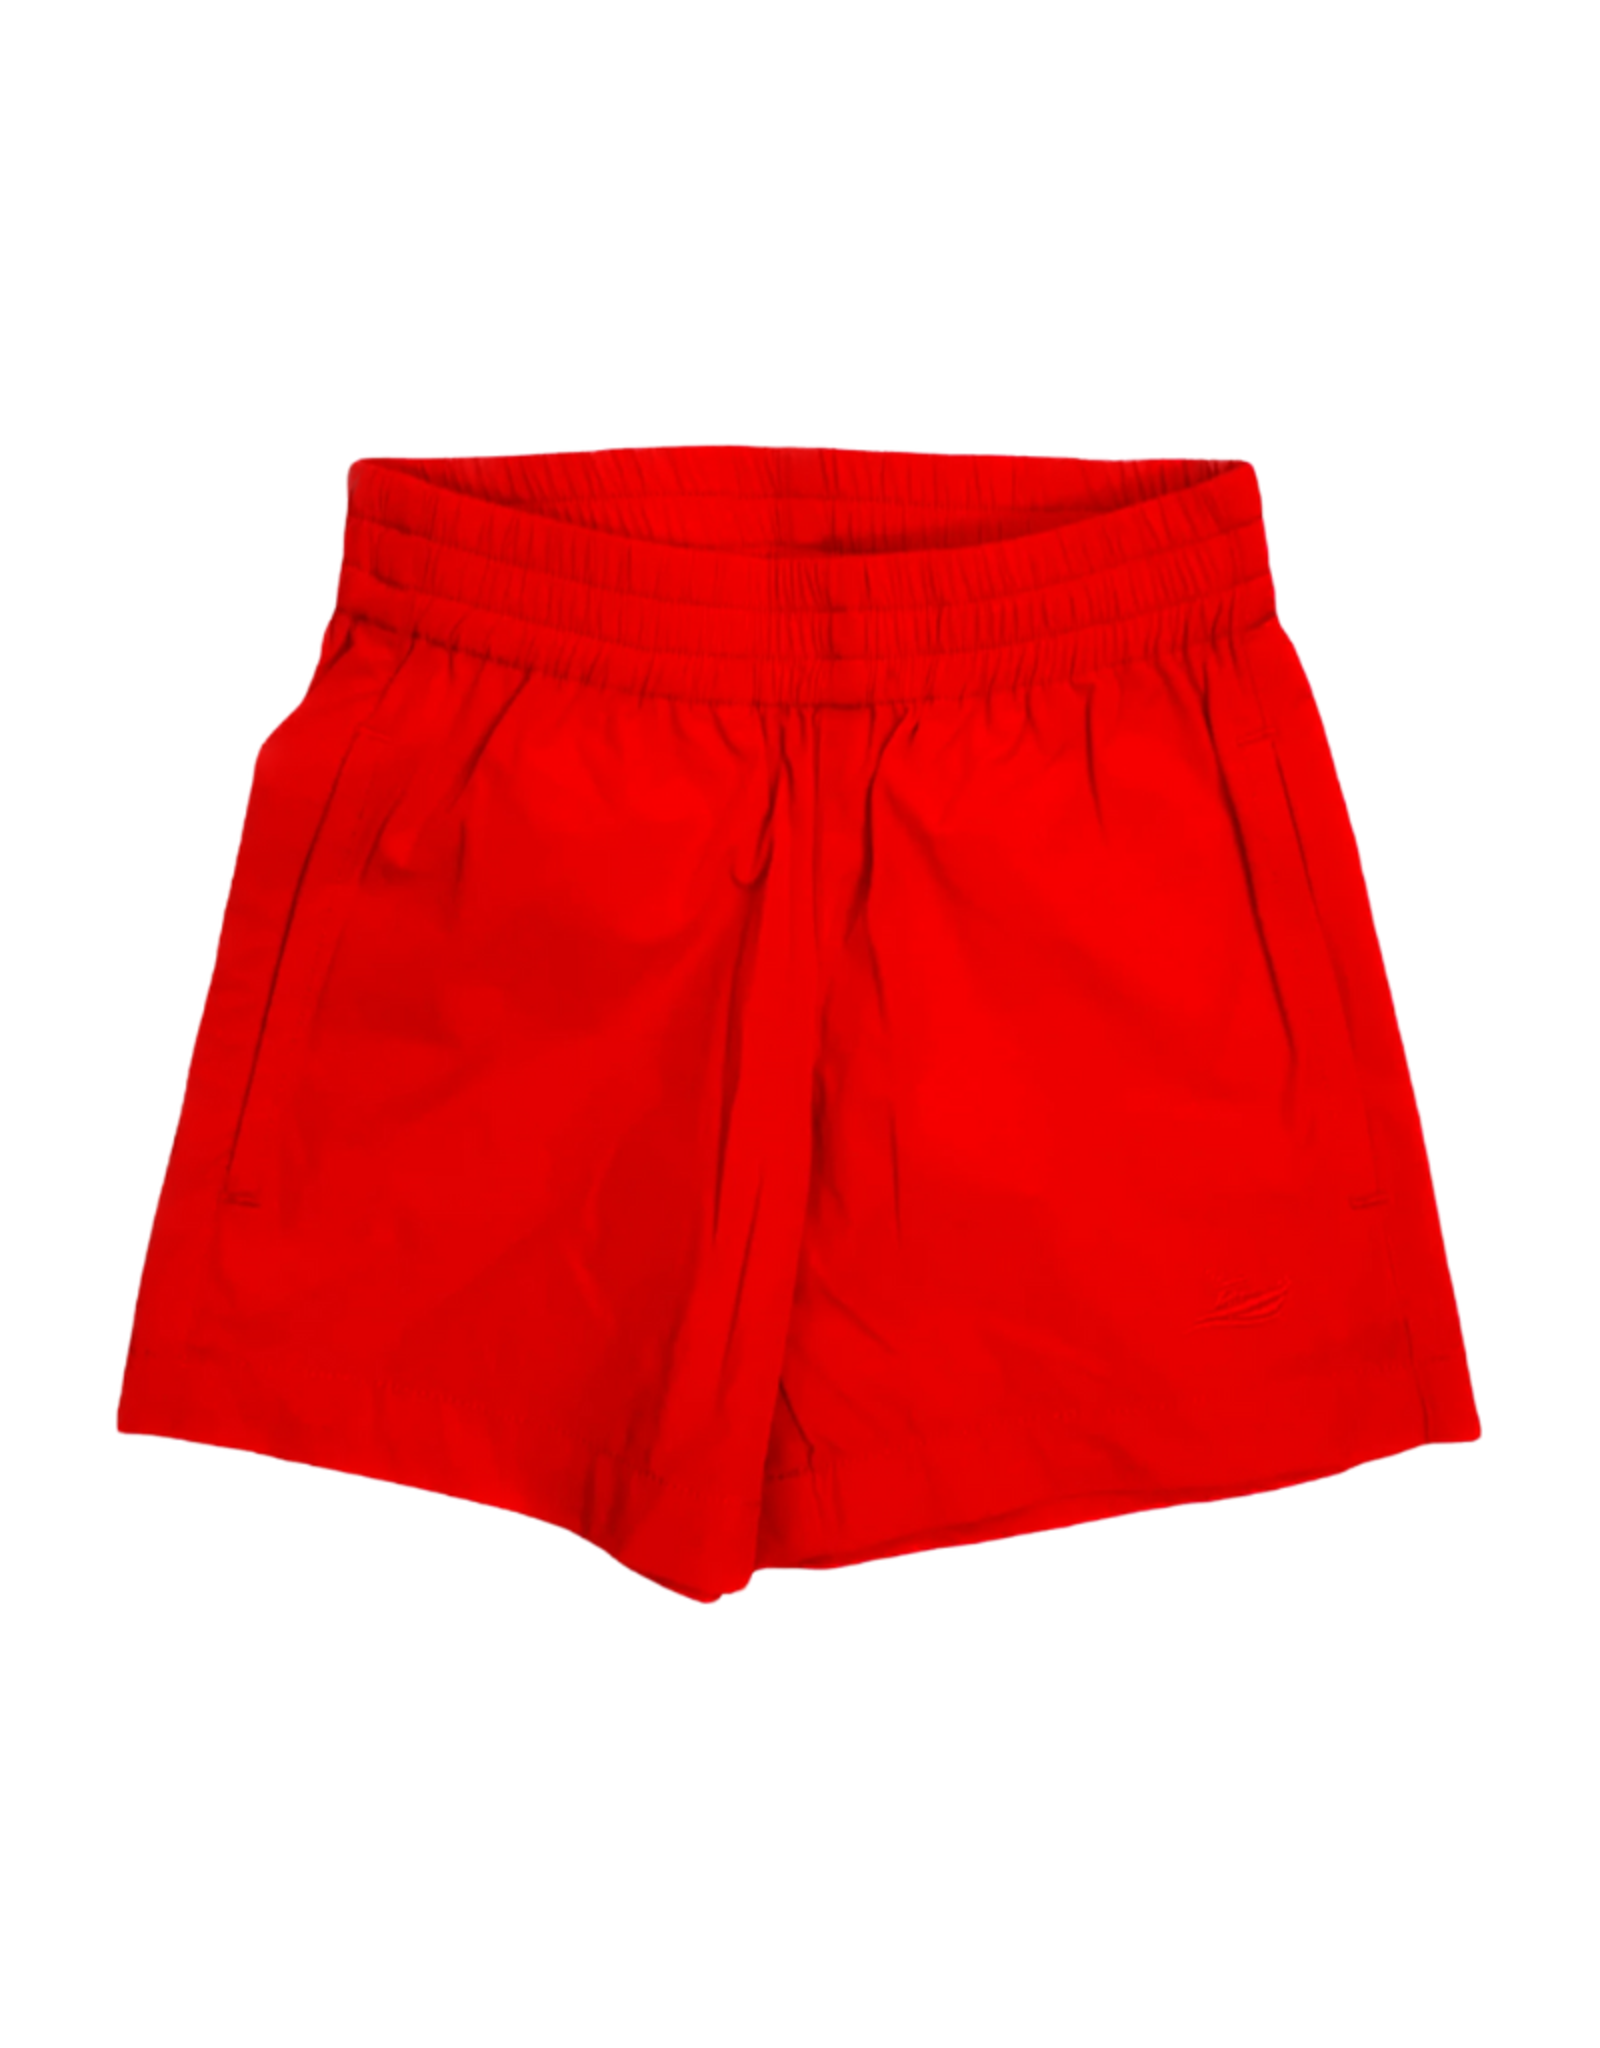 SouthBound Performance Play Shorts, Red